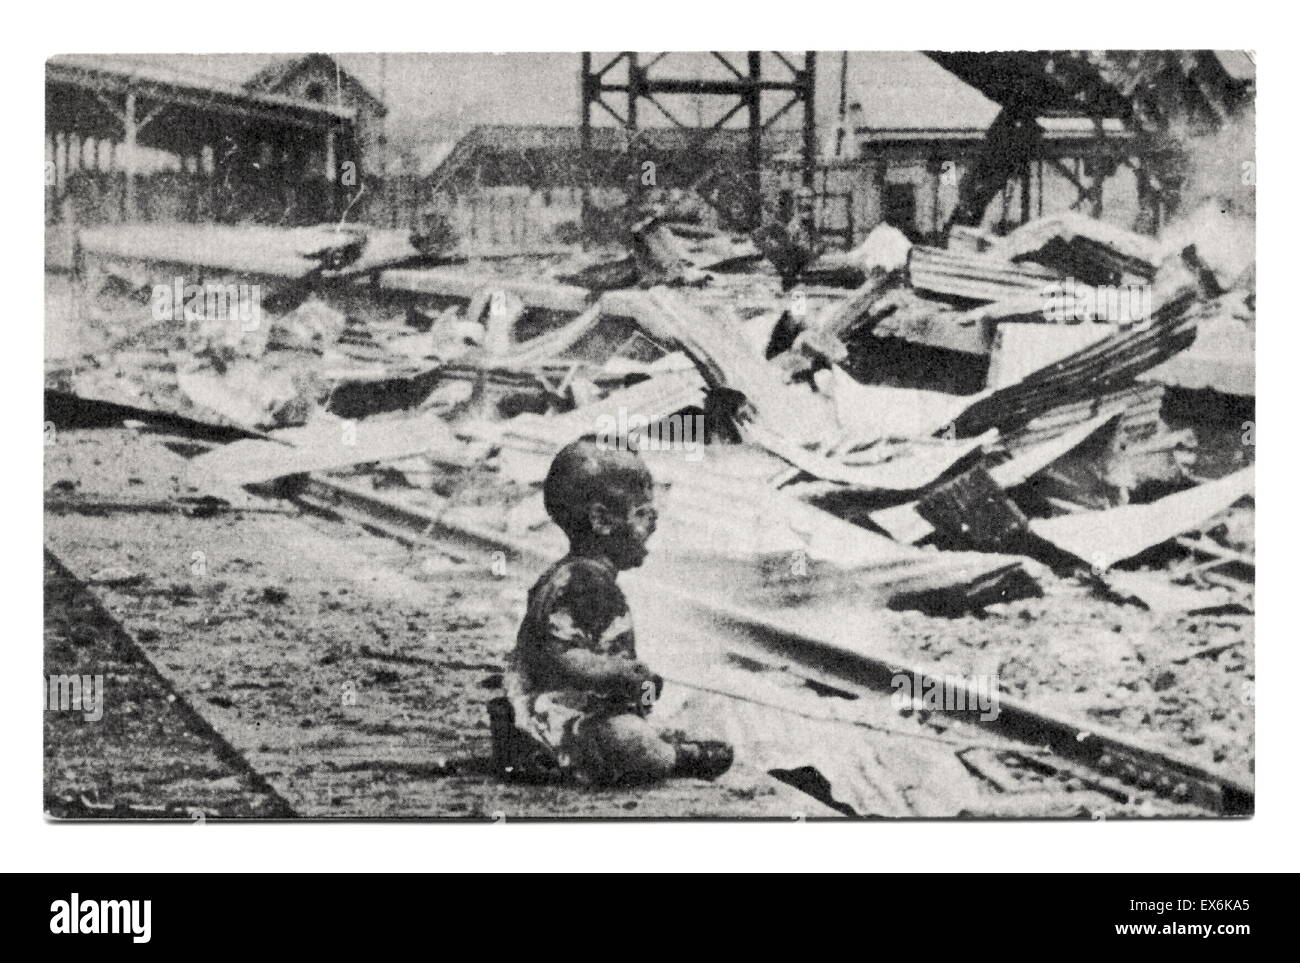 Second Sino-Japanese War 1937 During a bombing raid, the Japanese bombed a Chinese train station that housed women and children. This baby survived, although injured. Stock Photo